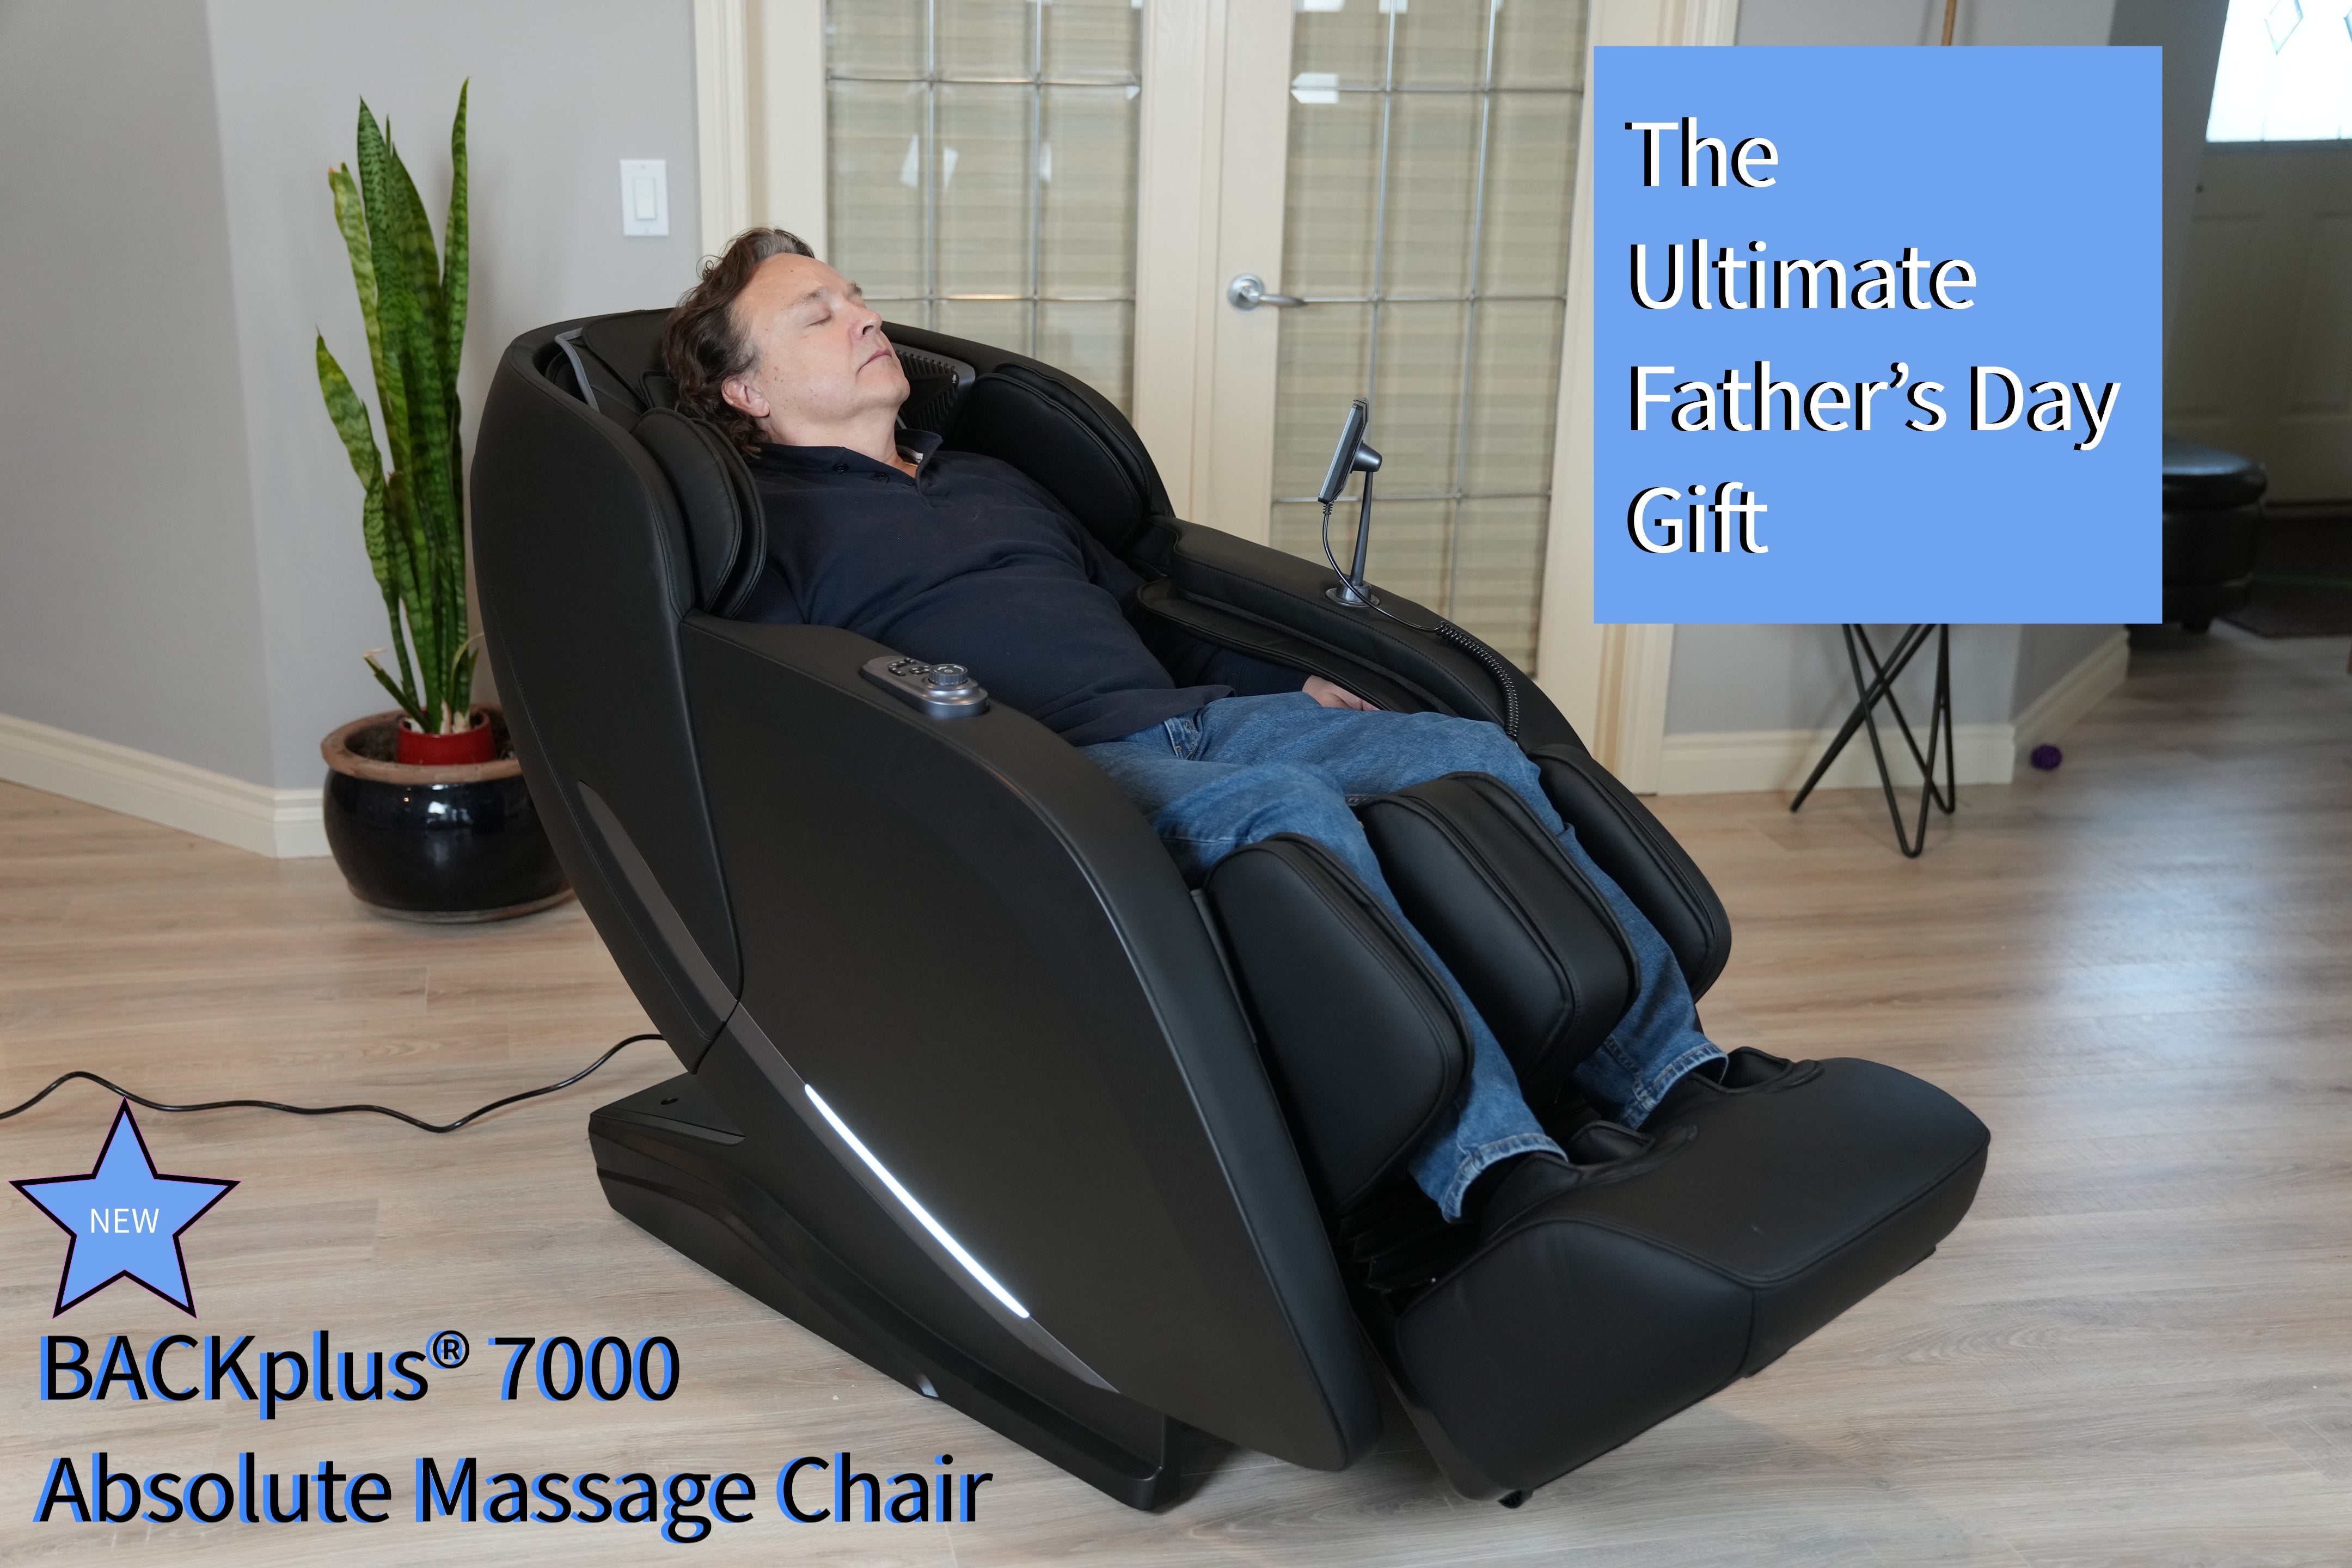 The Perfect Father’s Day Gift: The NEW BACKplus® 7000 Absolute Massage Chair